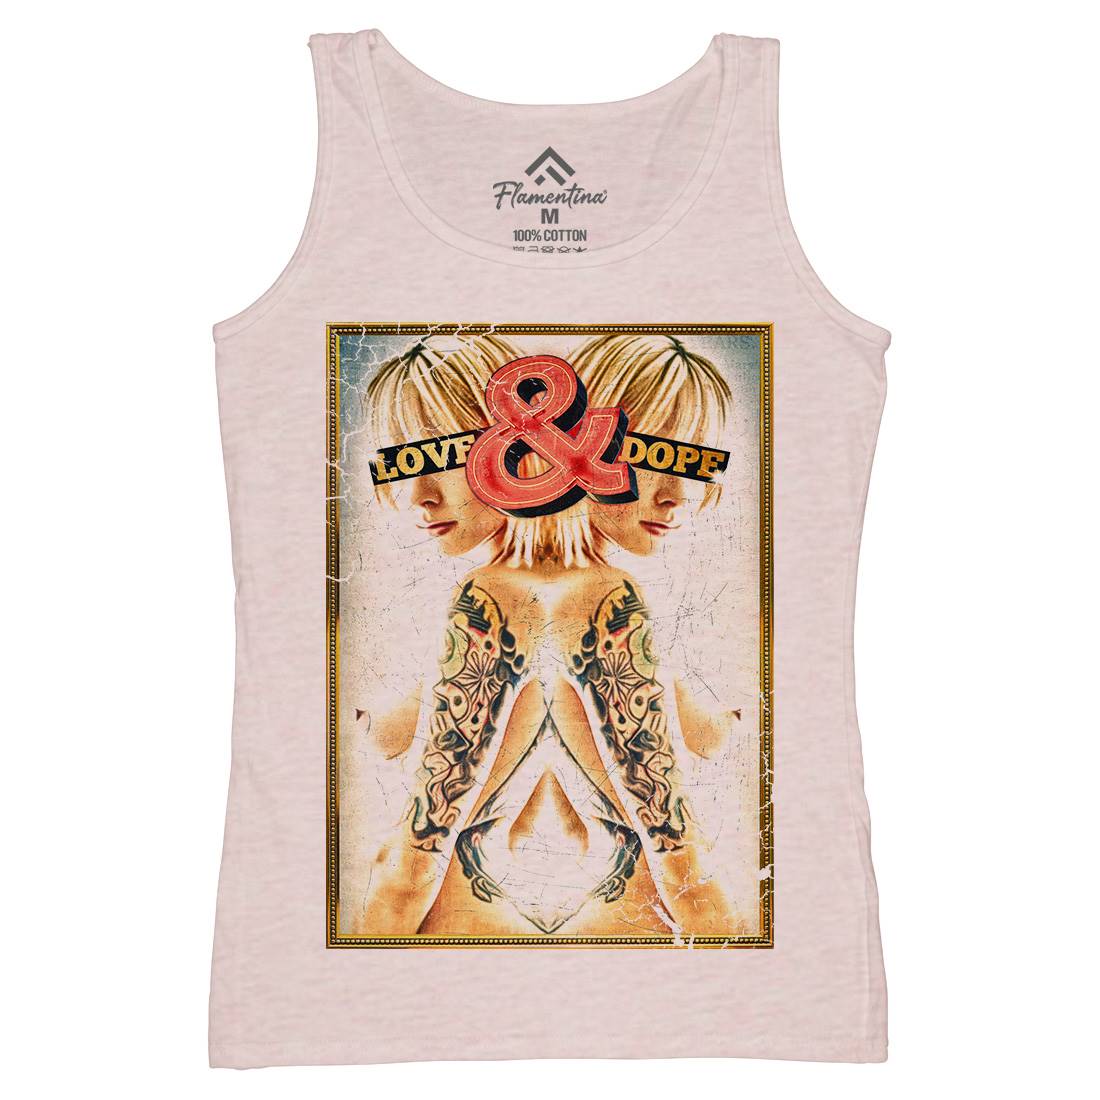 Love And Dope Womens Organic Tank Top Vest Drugs A869